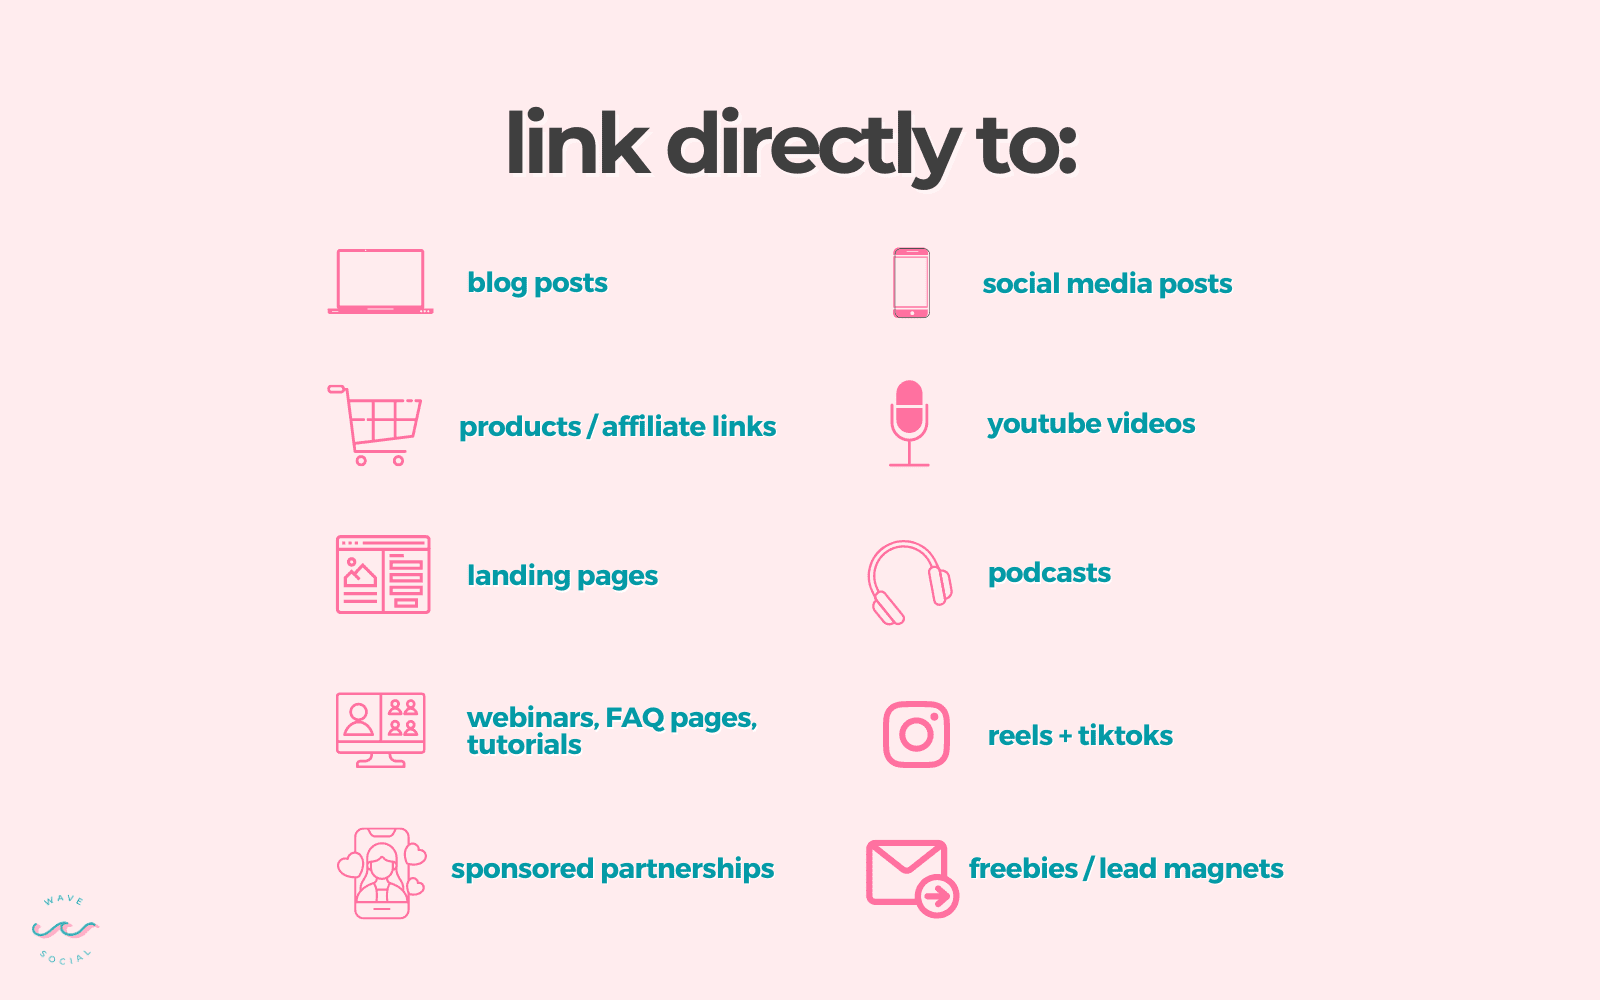 graphic that shows all of the places you can link to on pinterest: social media posts, freebies, lead magnets, blog posts, products, affiliate links, landing pages, websites, podcasts, youtube, and sponsored partnerships